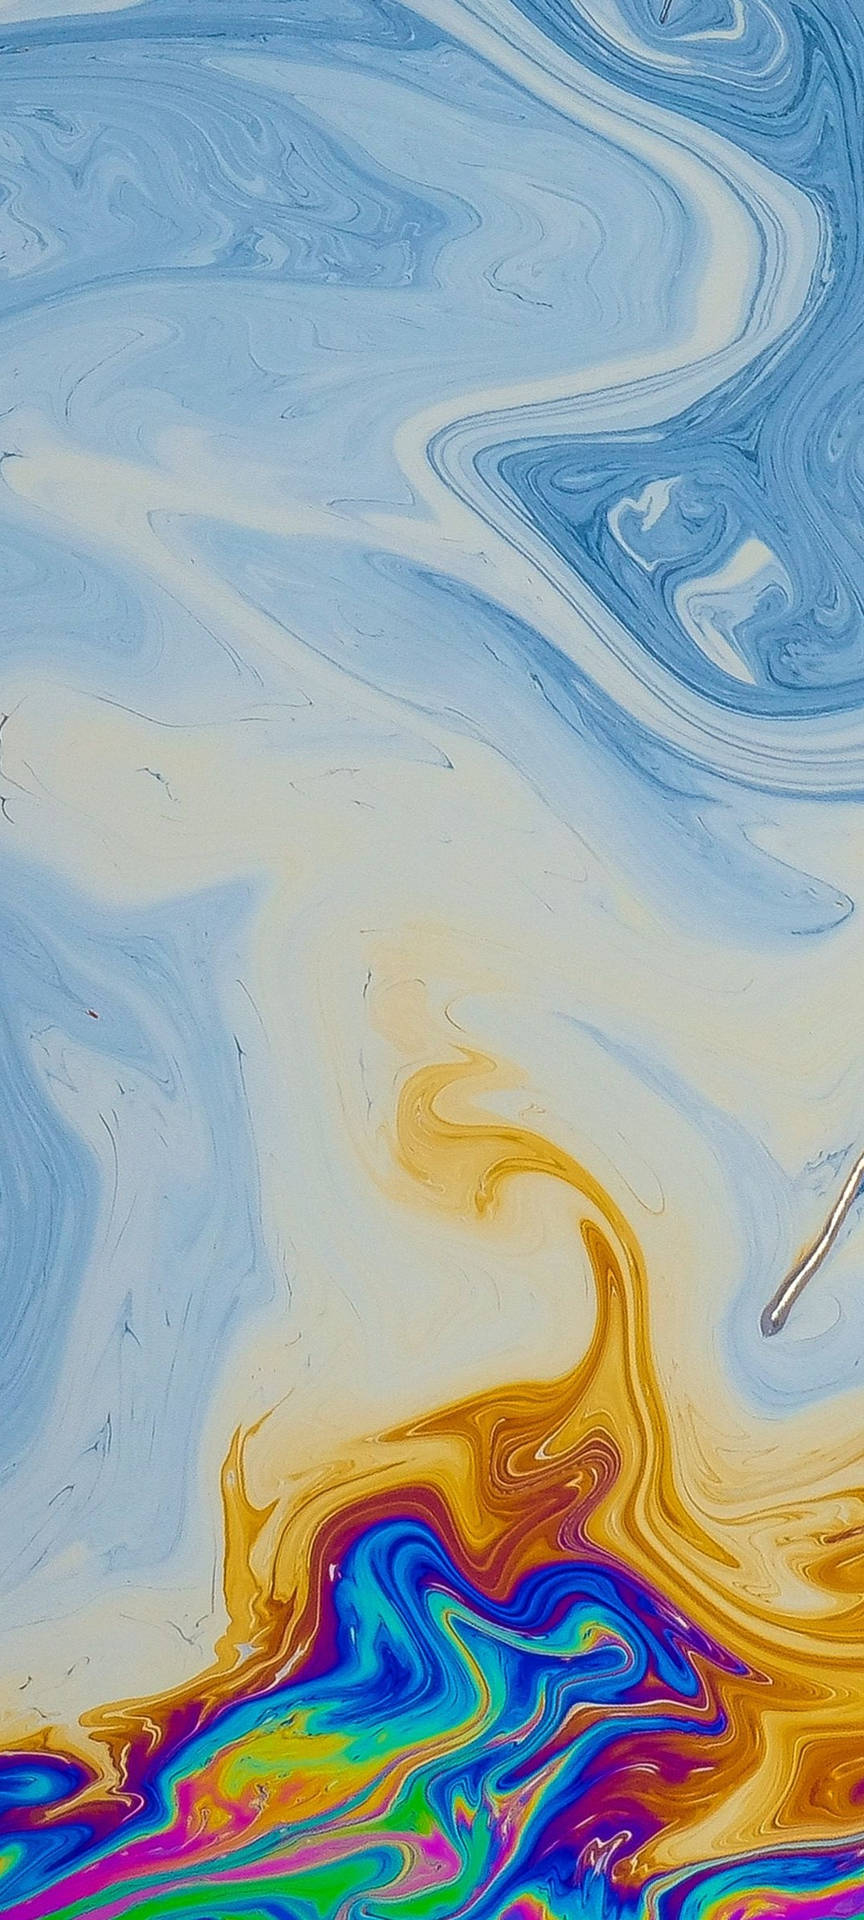 Redmi Note 10 Colorful Oil On Water Wallpaper